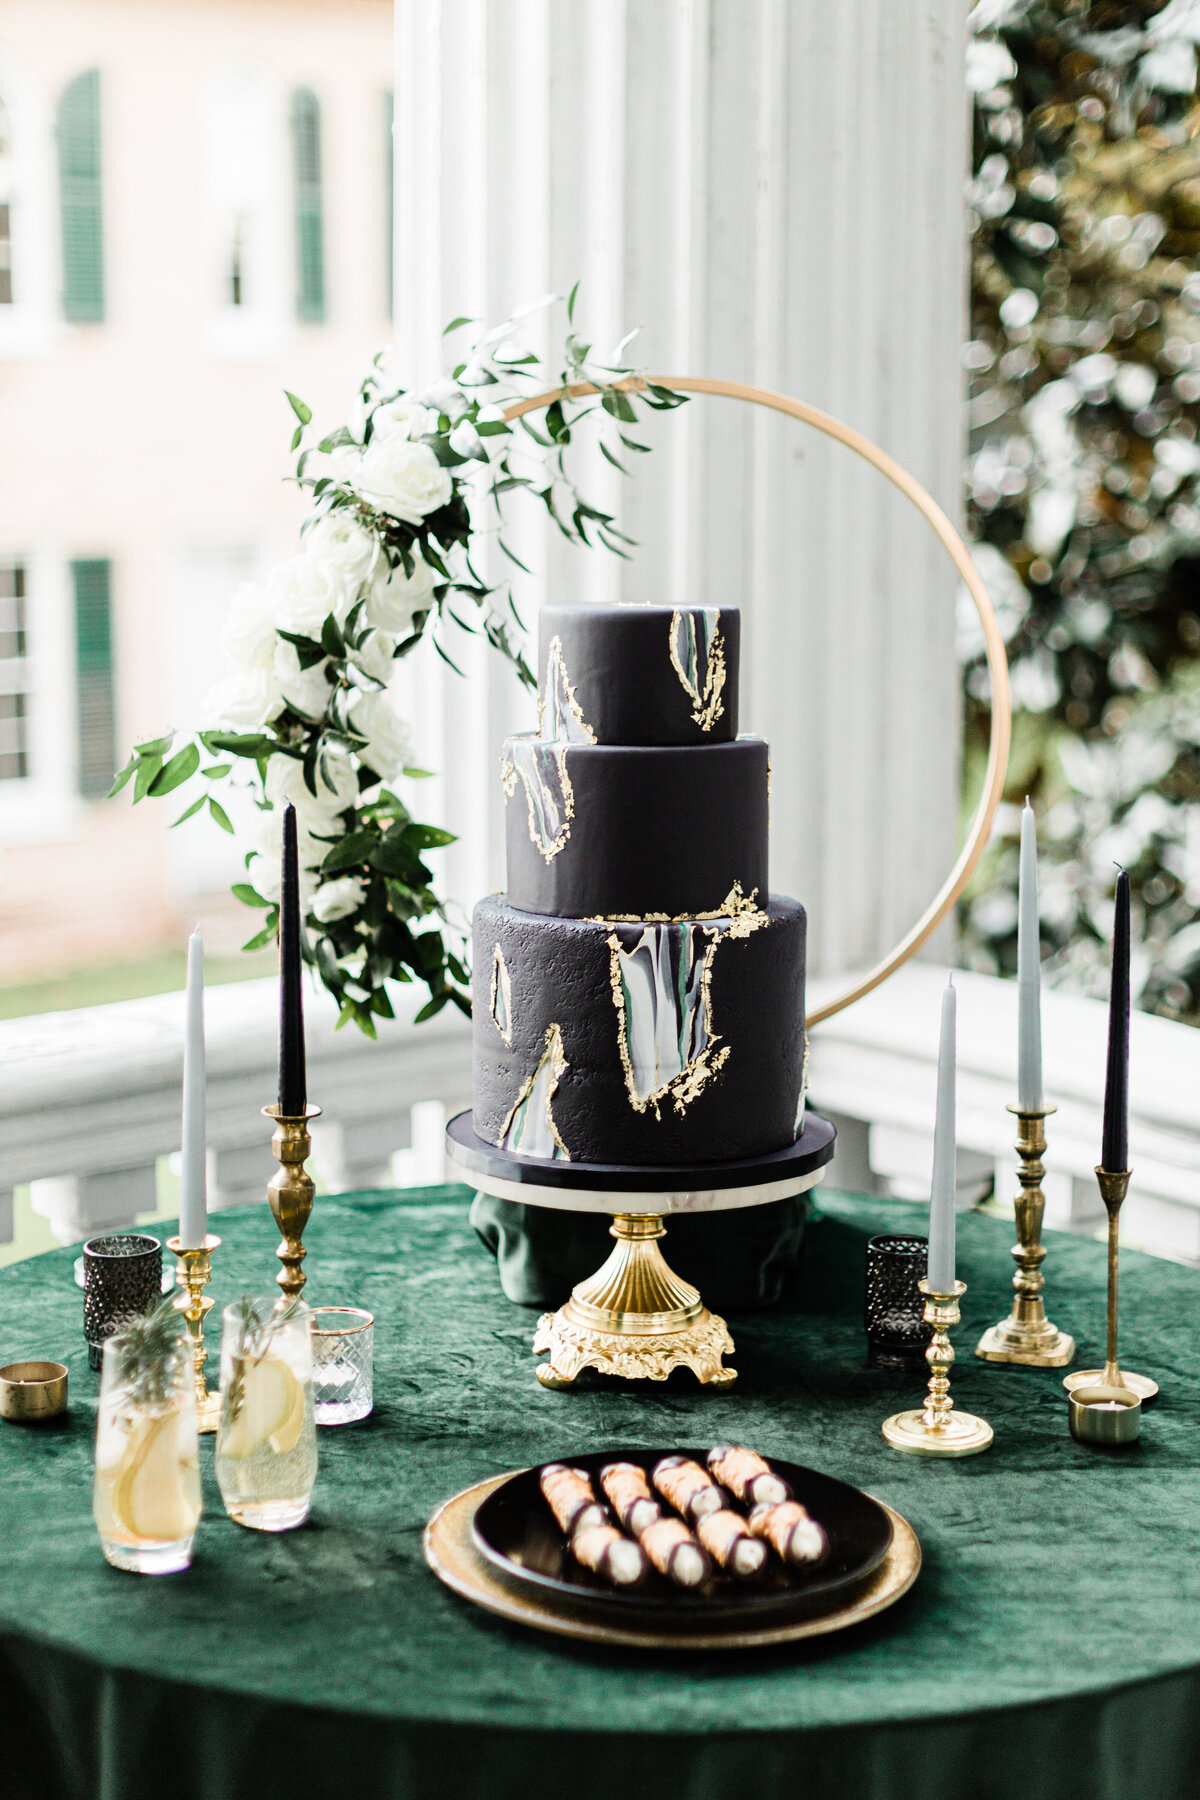 This black and white cake stole our hearts and is something so classy and so different.